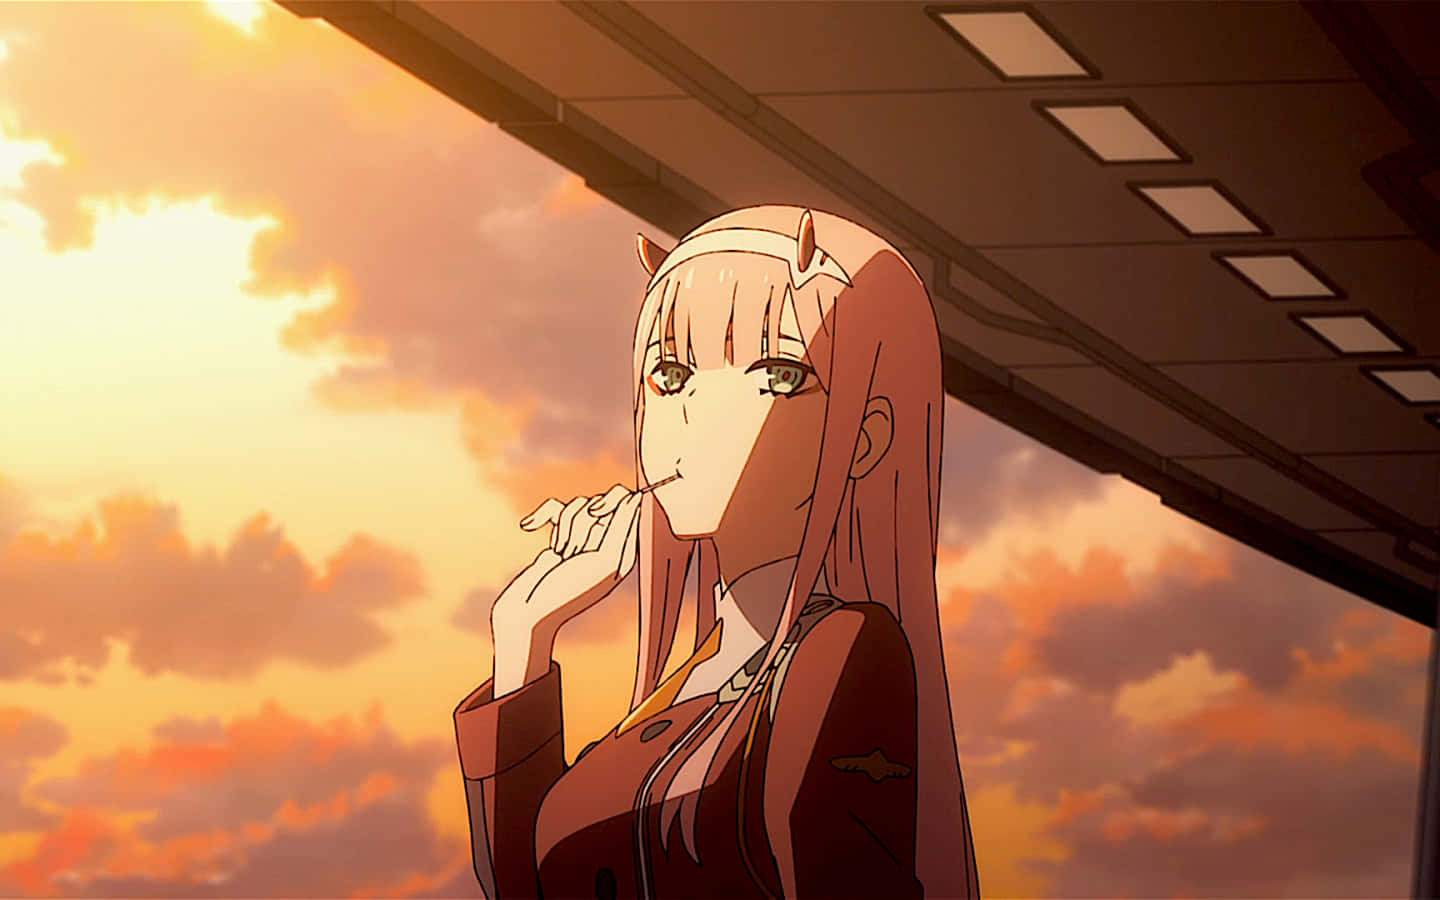 Download Two pilot characters from the anime Darling In The Franxx